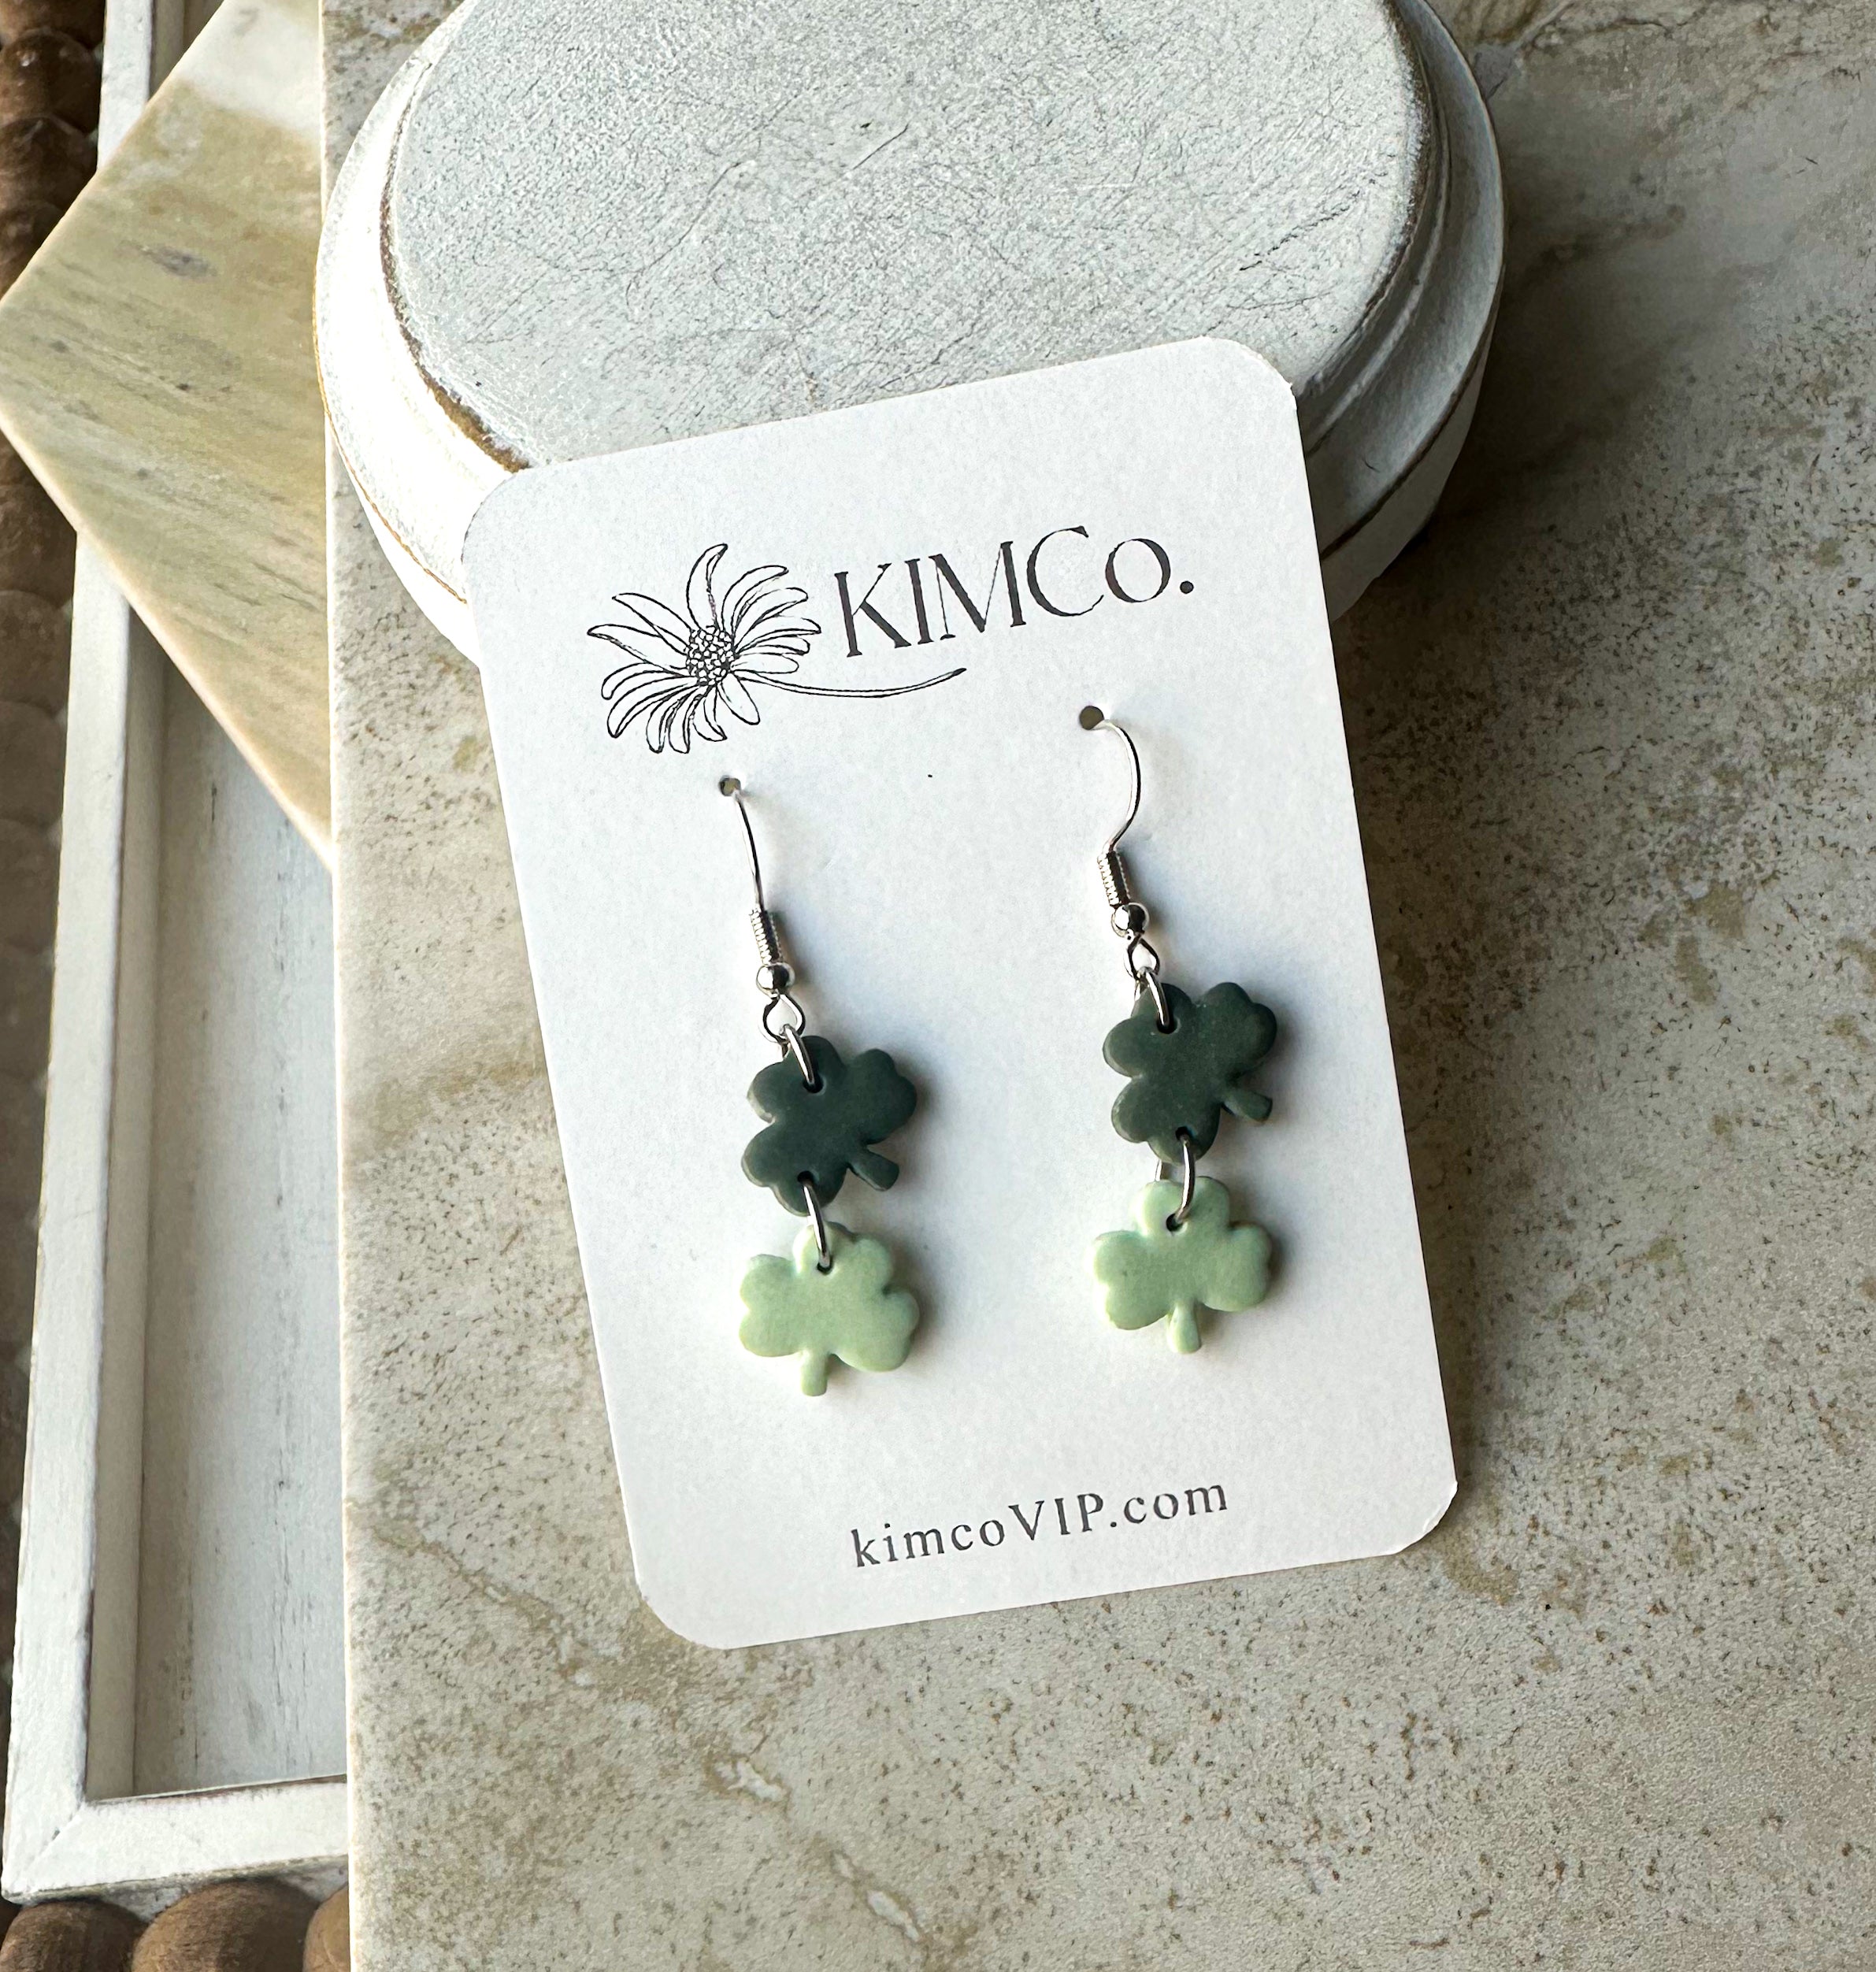 Shamrock Polymer Clay Earrings|statement earrings|gifts for her|colorful earrings|boho earrings|abstract earrings|green earrings|shamrocks|St. Patricks Day